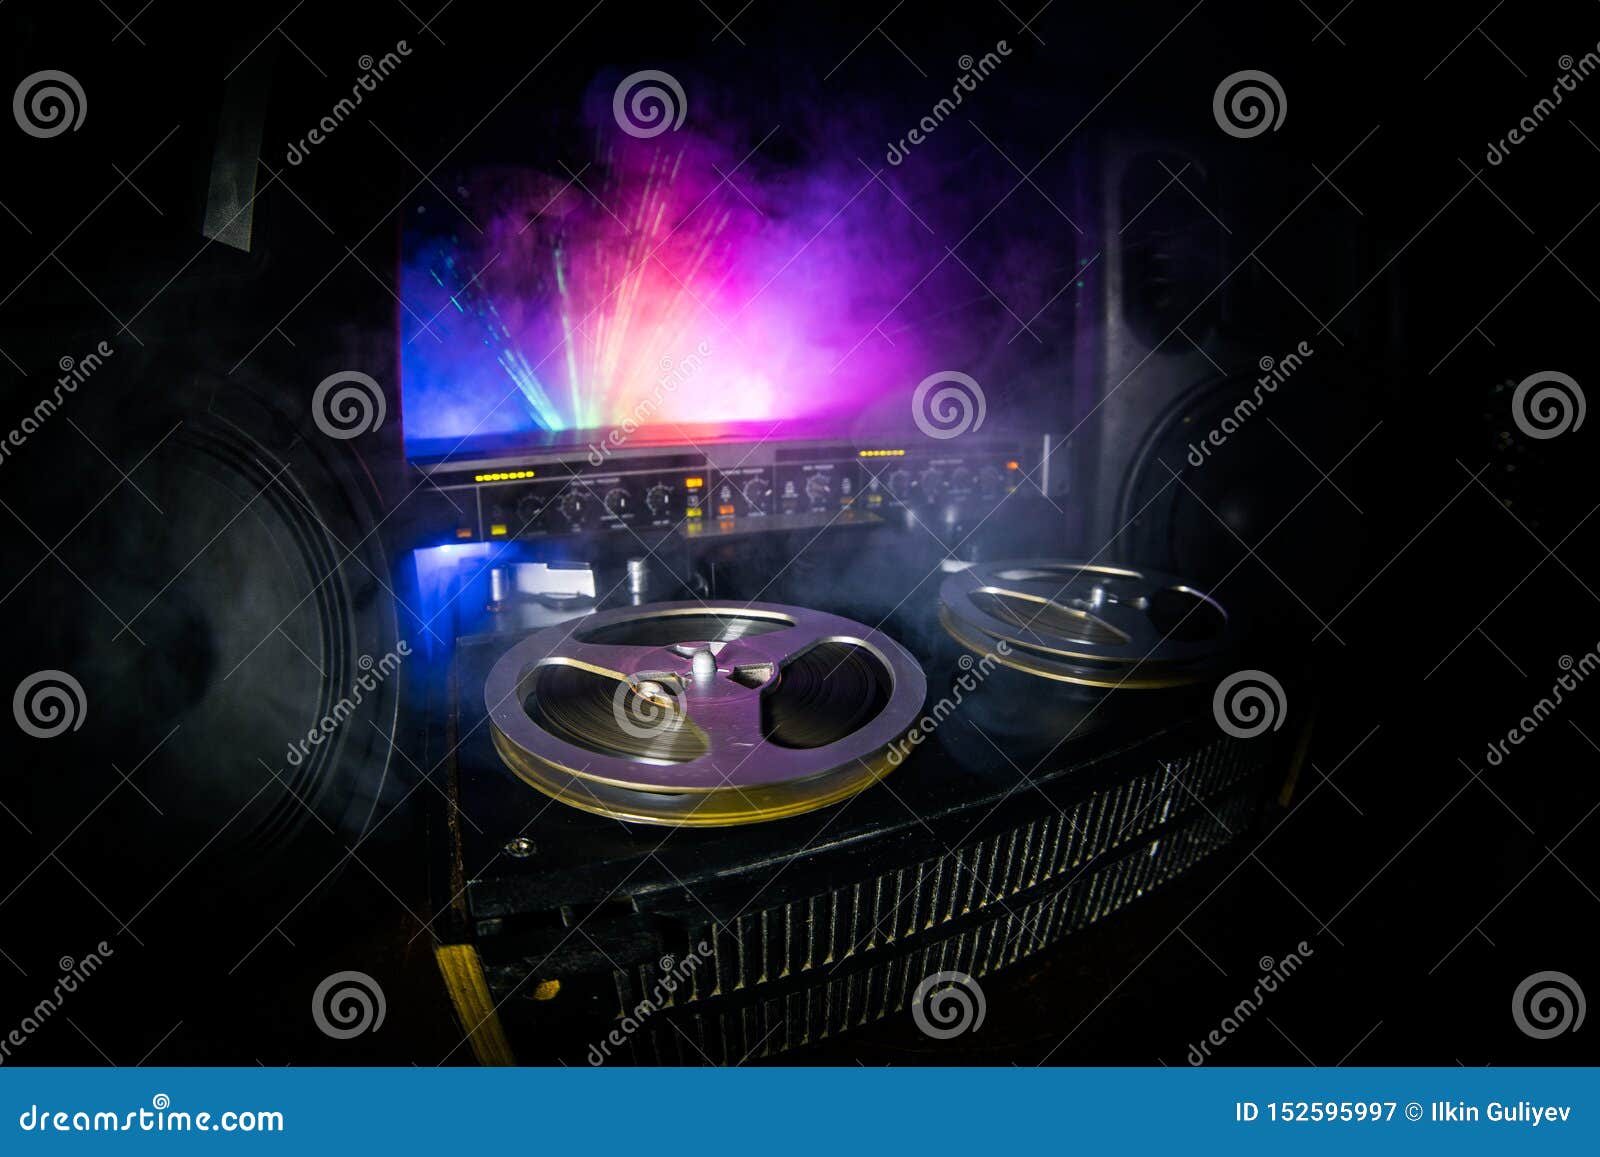 Old Vintage Reel To Reel Player and Recorder on Dark Toned Foggy  Background. Analog Stereo Open Reel Tape Deck Recorder Player Stock Image -  Image of background, archive: 152595997